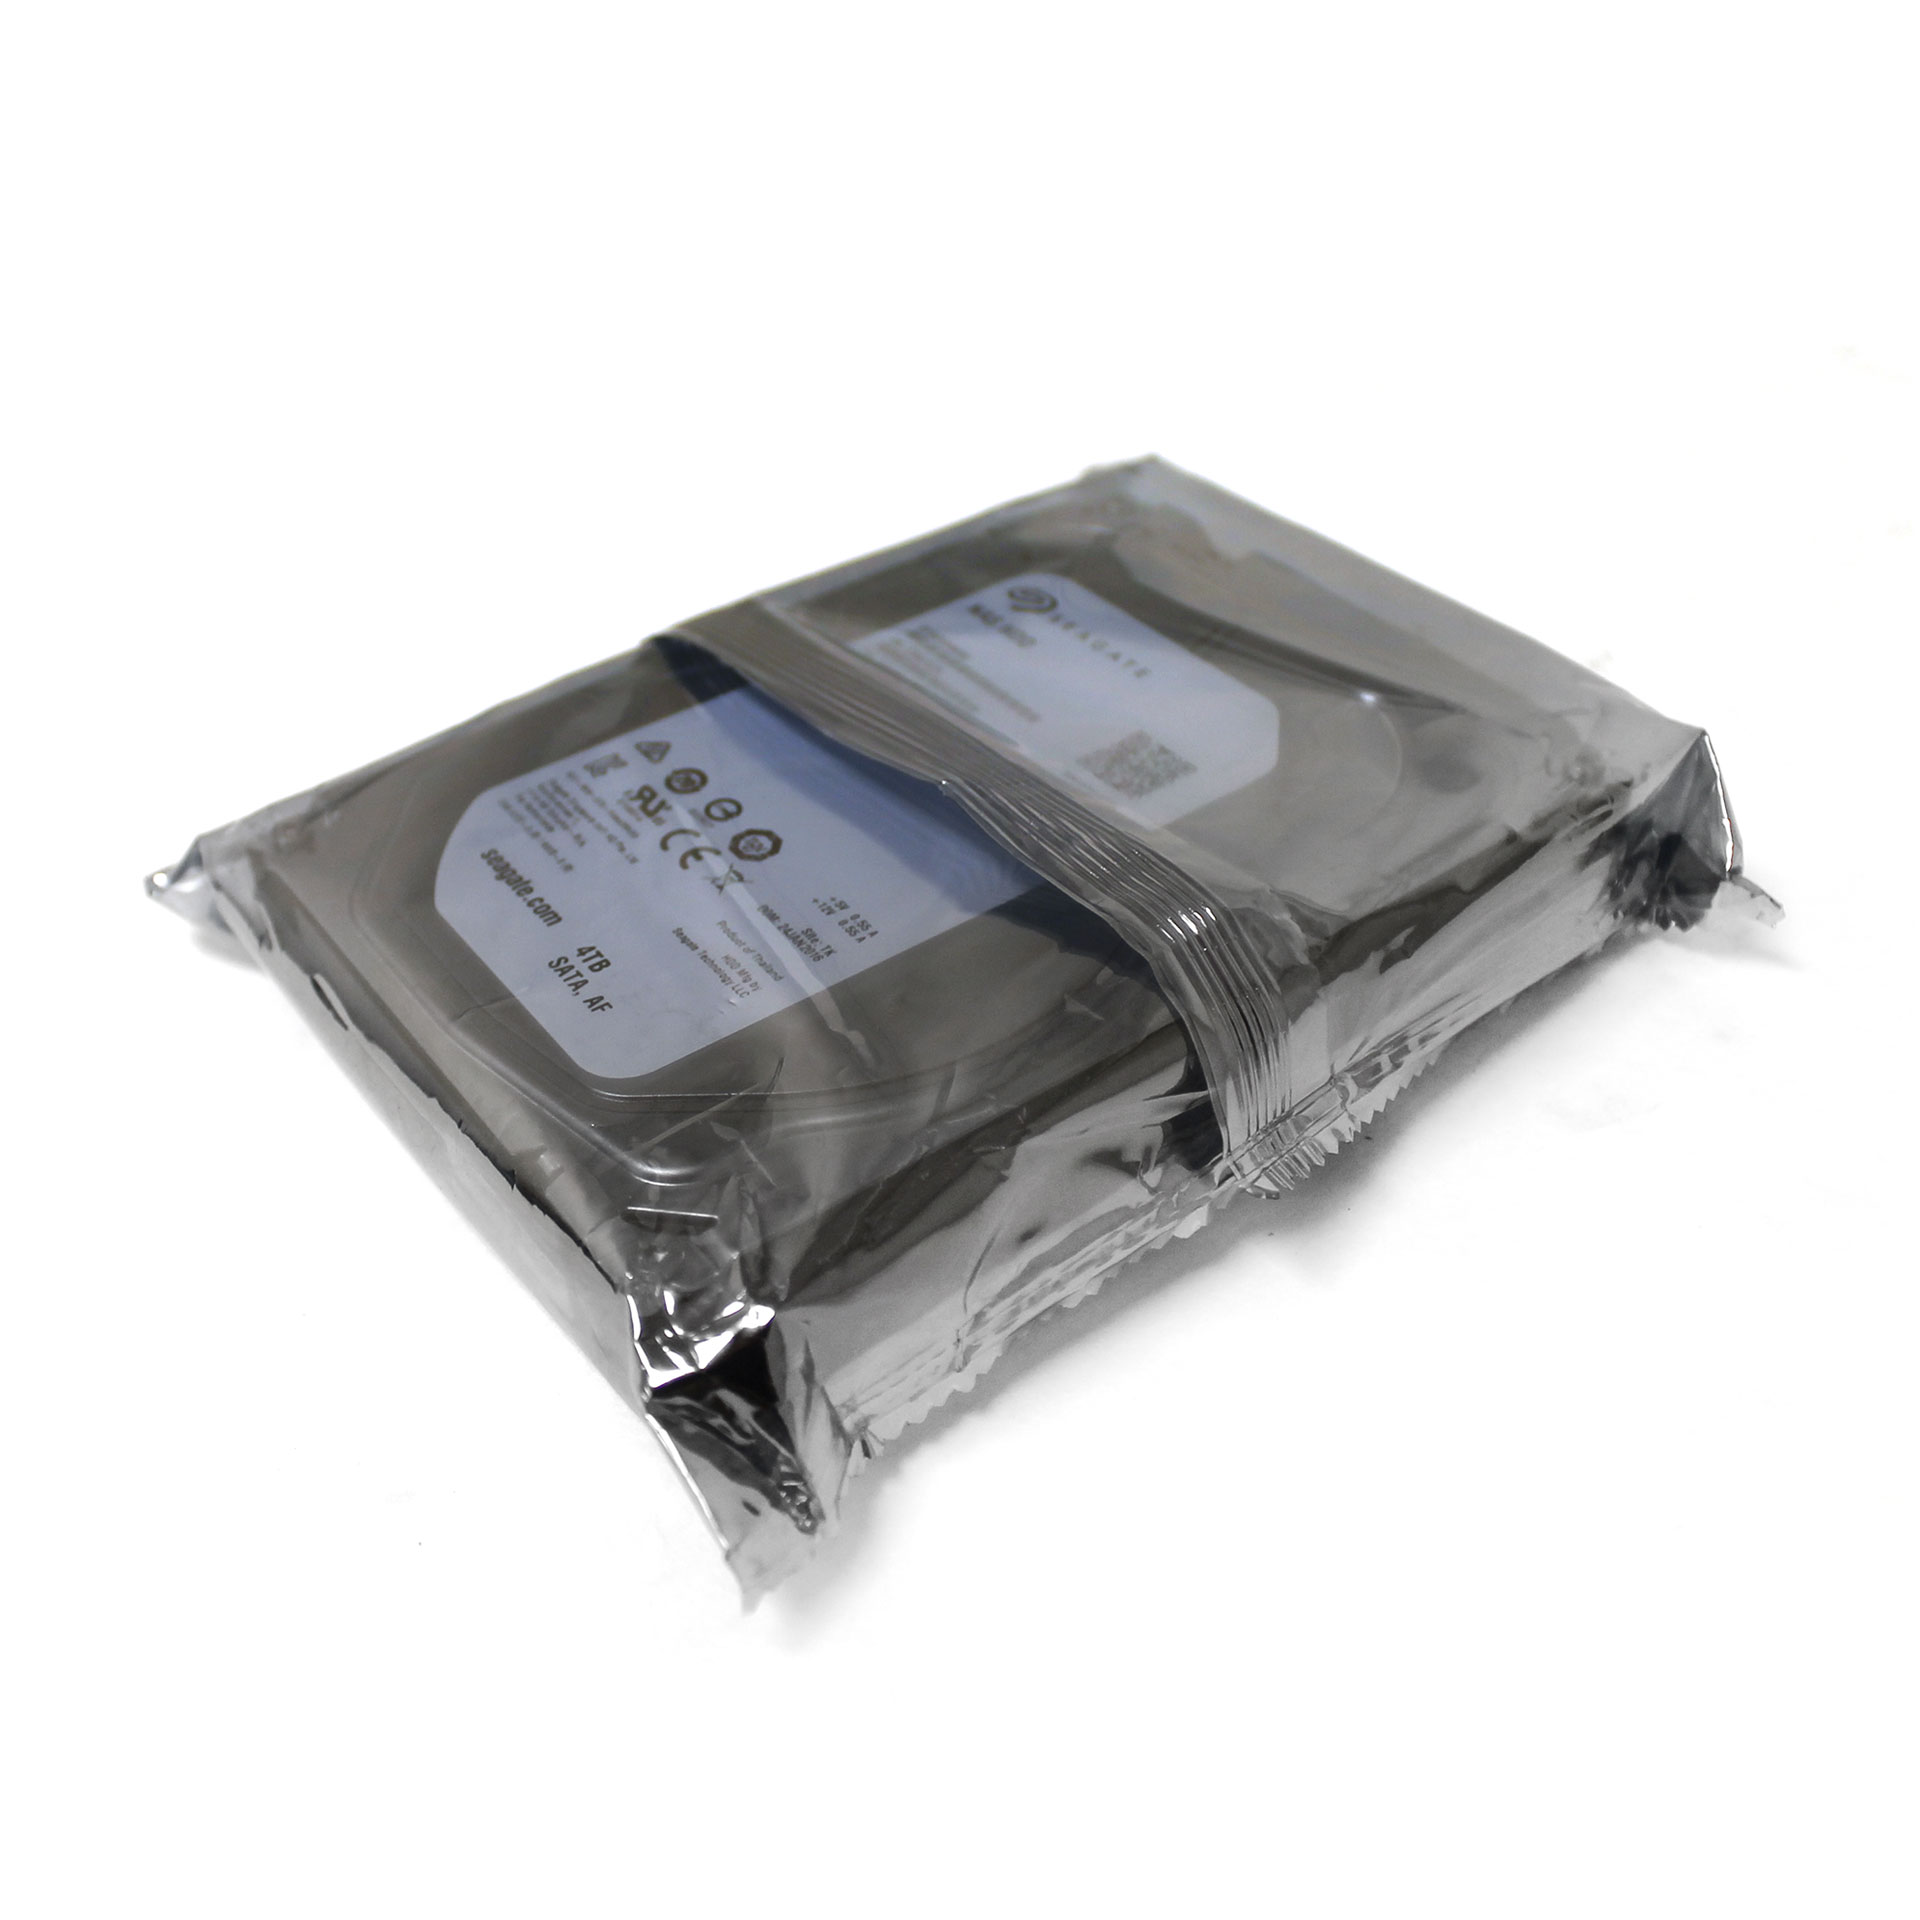 Seagate NAS 4TB ST4000VN000 64MB SATA 6.0Gb/s 1H4168-505 HDD - Click Image to Close